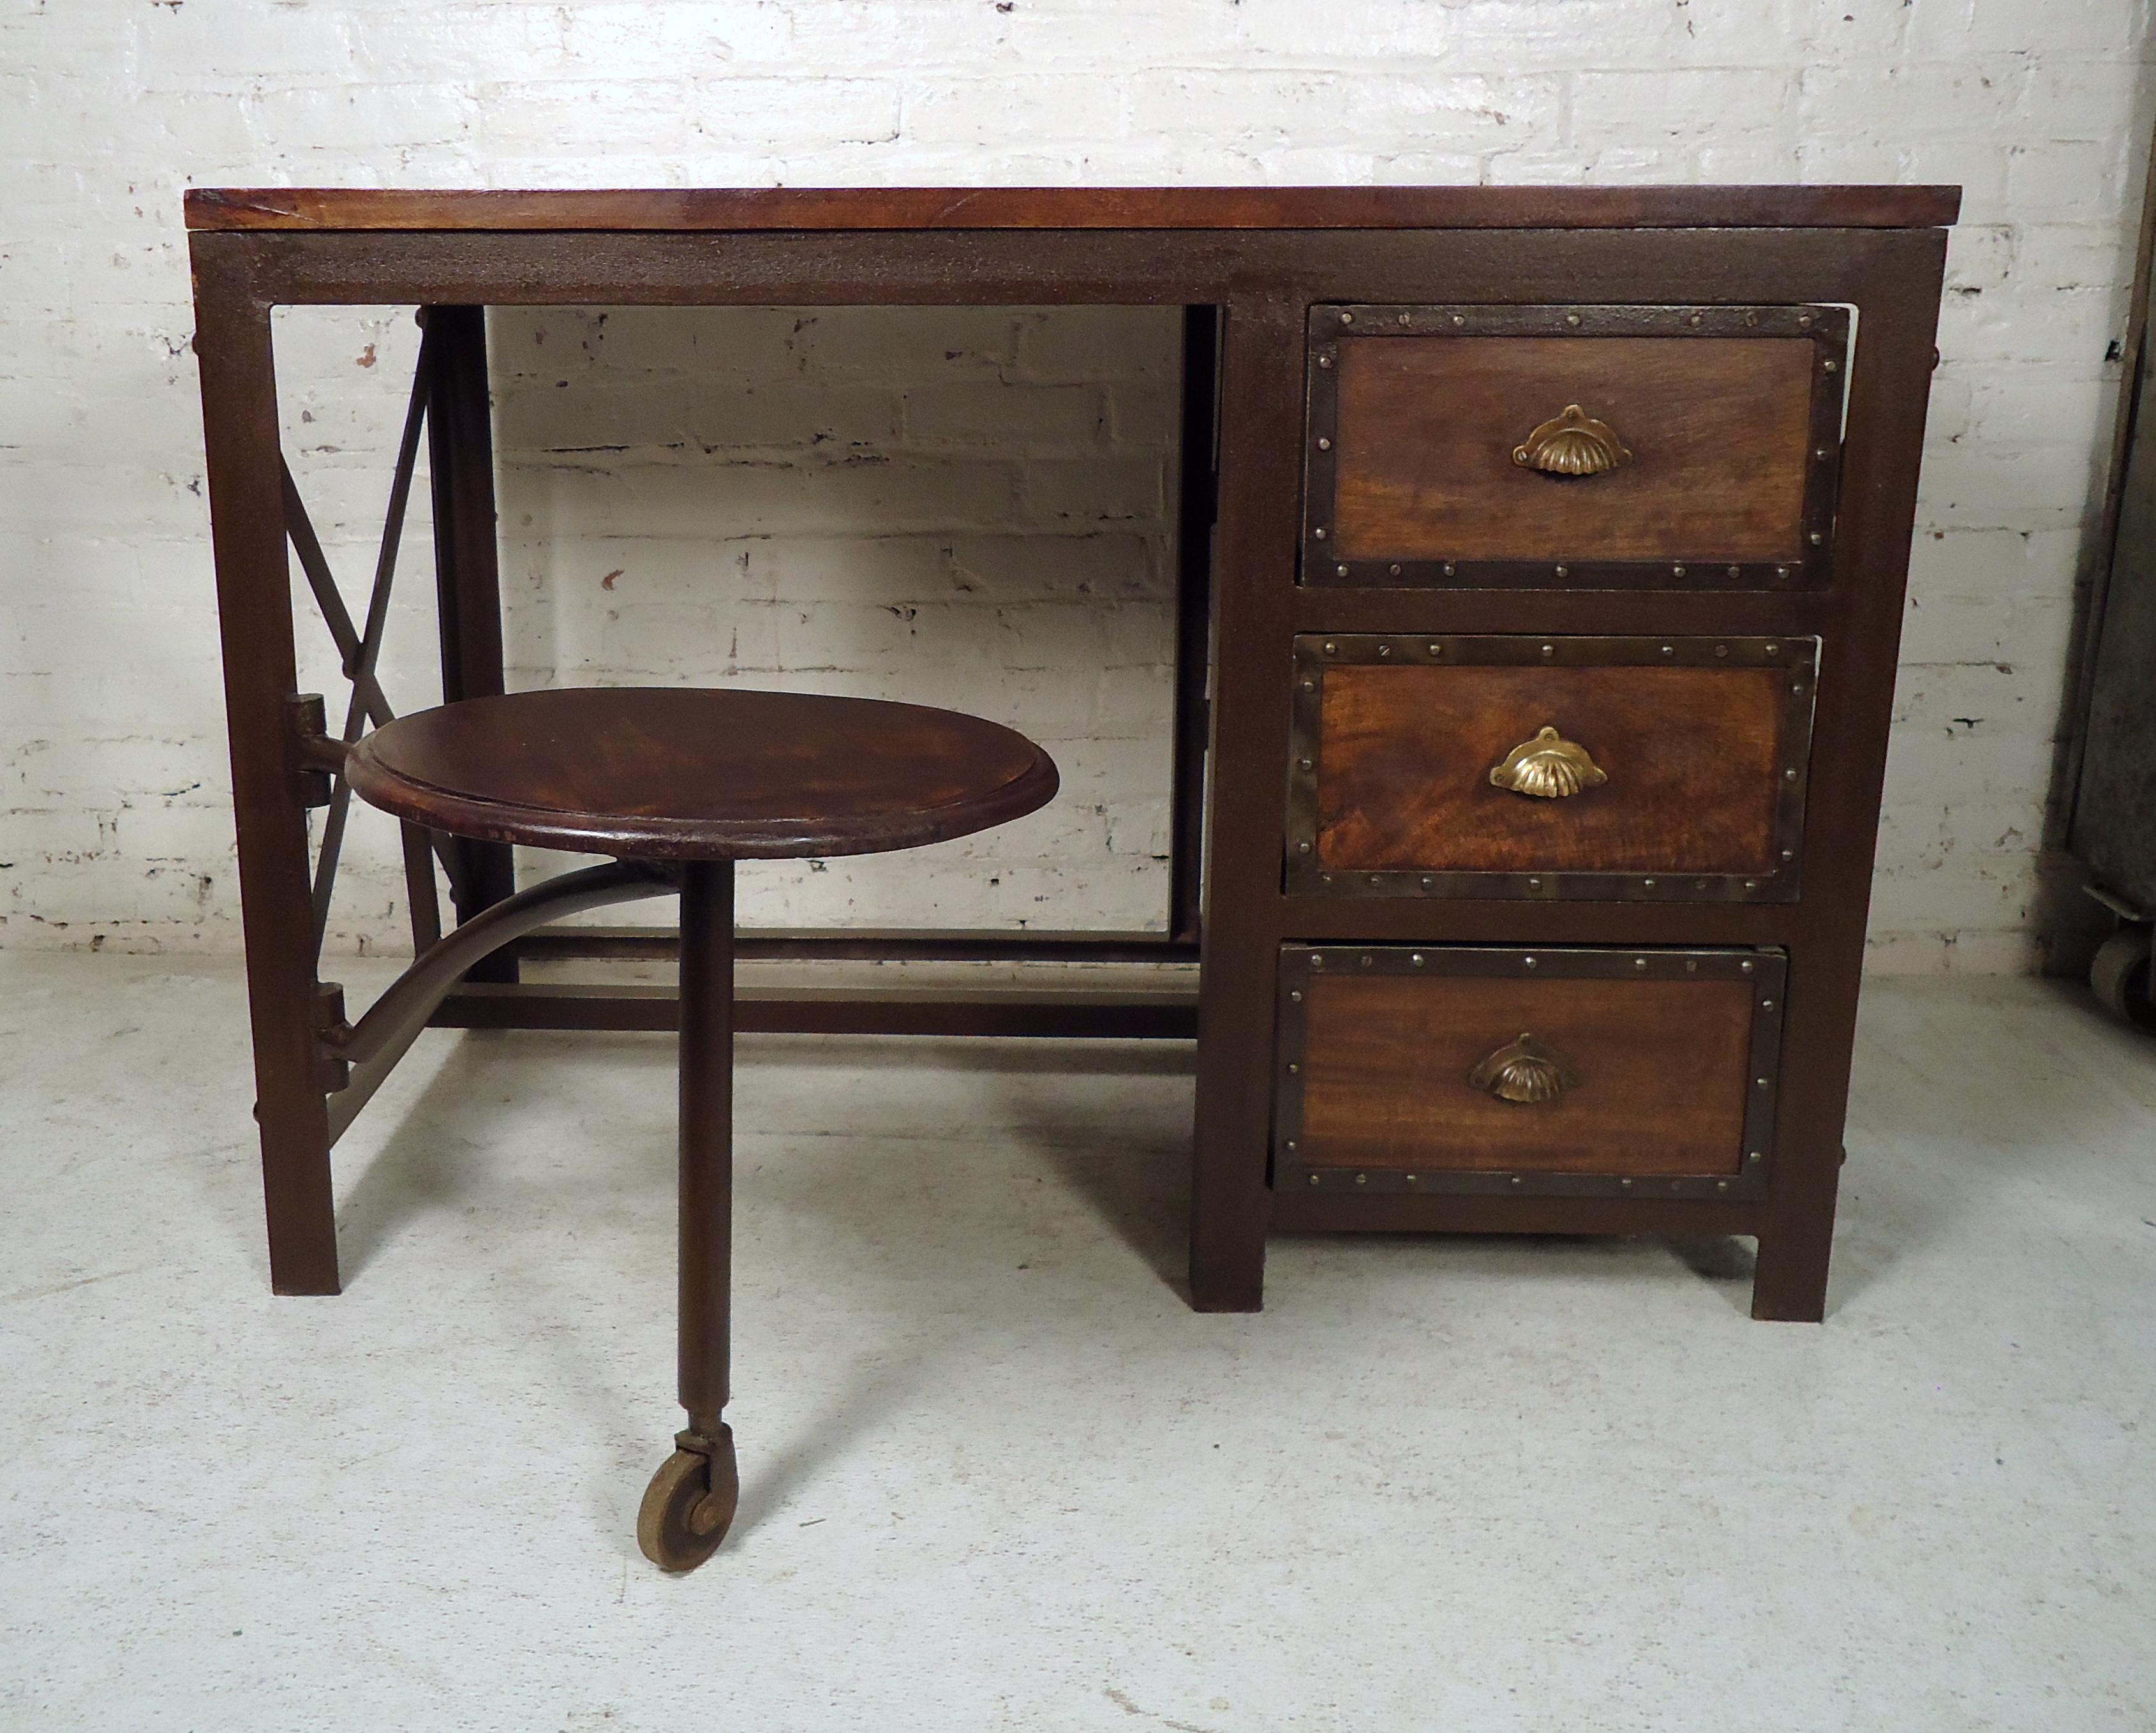 This unique vintage modern desk features rich wood grain, metal frame, three spacious drawers with brass pulls and swing out stool. 
(Please confirm item location, NY or NJ, with dealer).